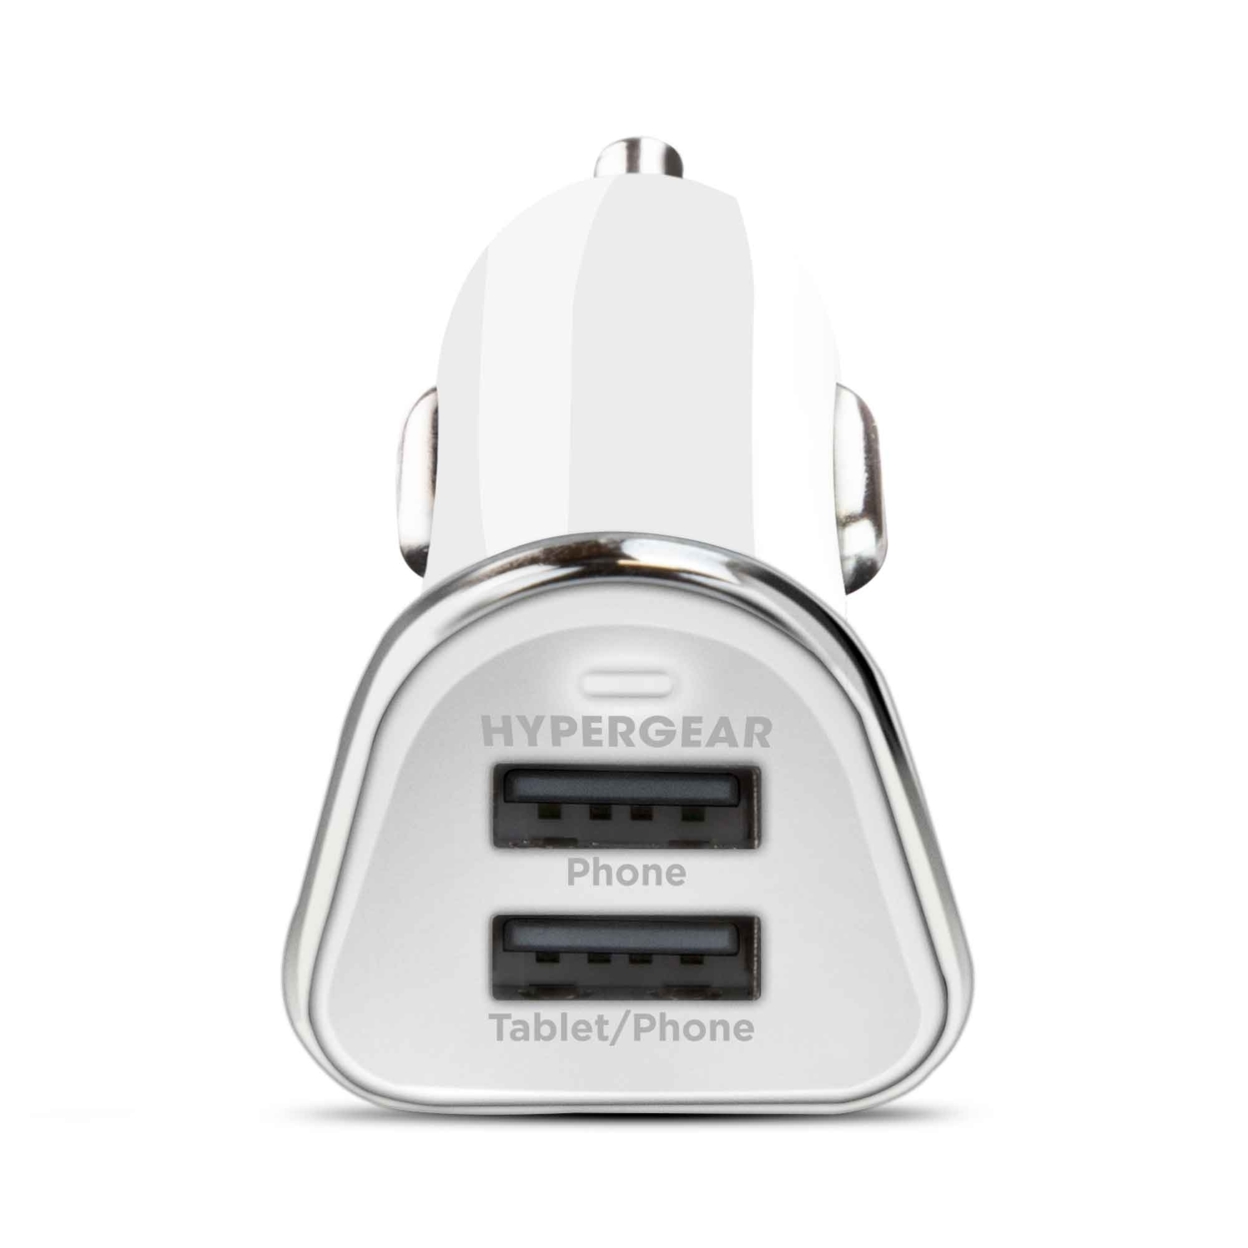 HyperGear Hi-Power Dual USB 3.4A Car Charger (DUSBCHARGER-PRNT) - White